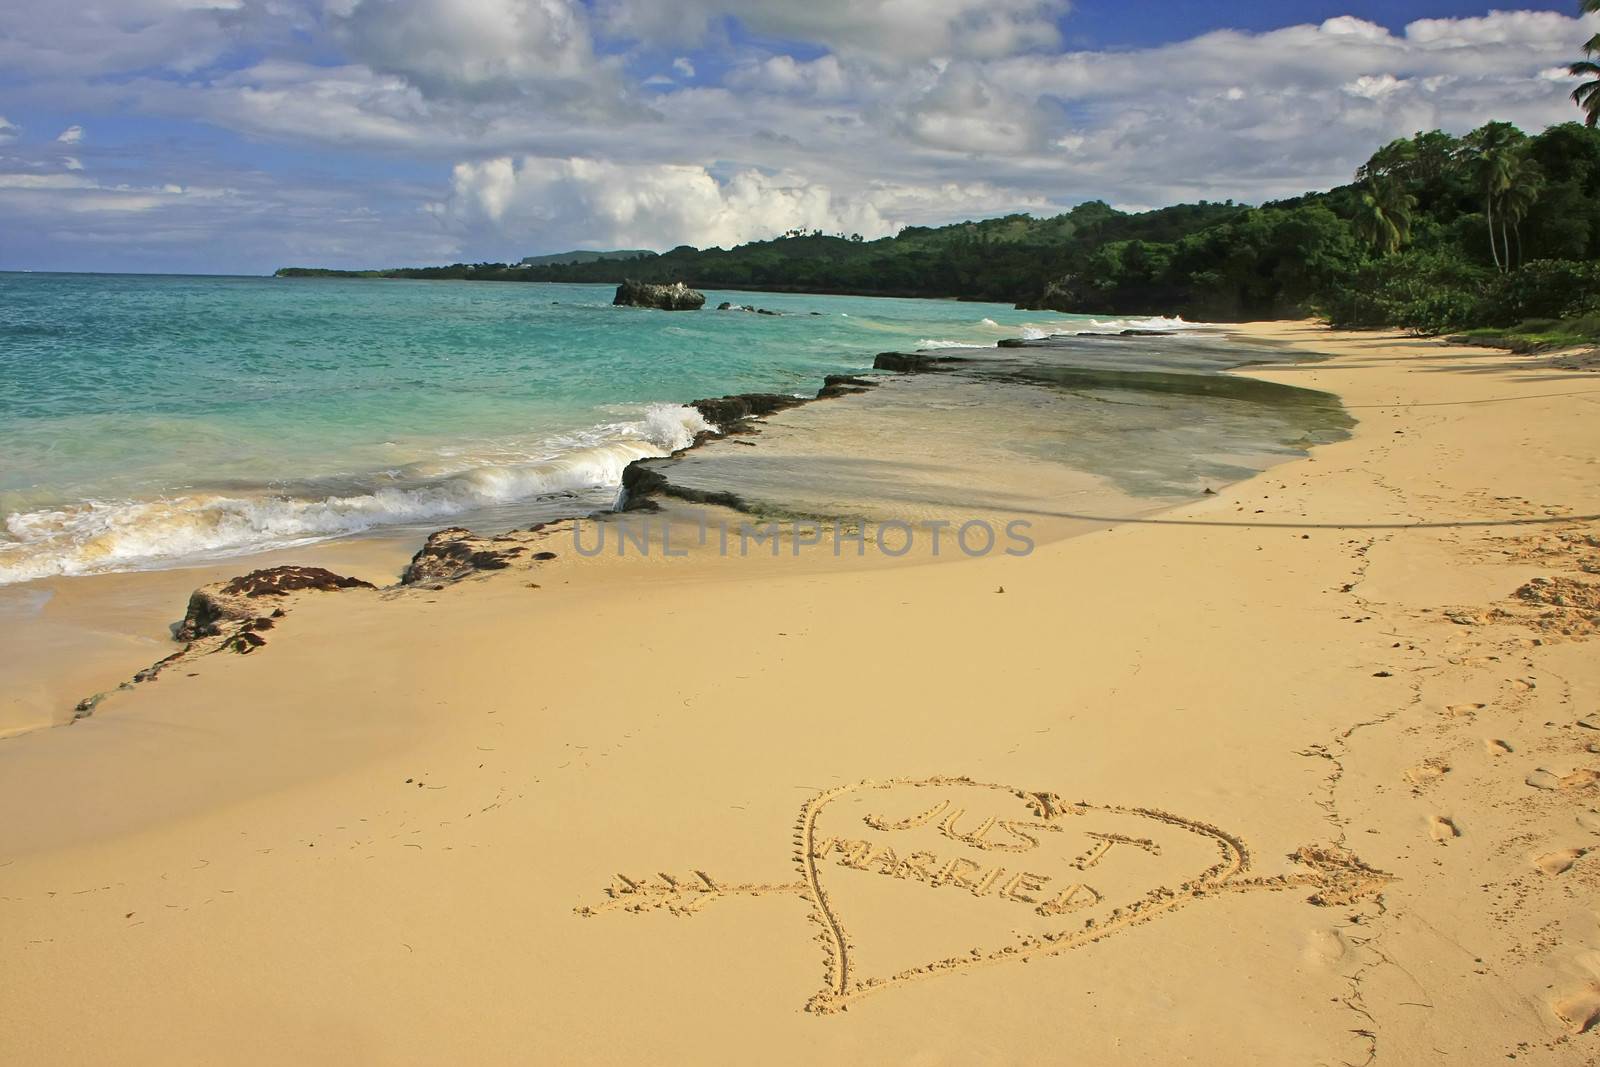 "Just married" written in sand on a beach